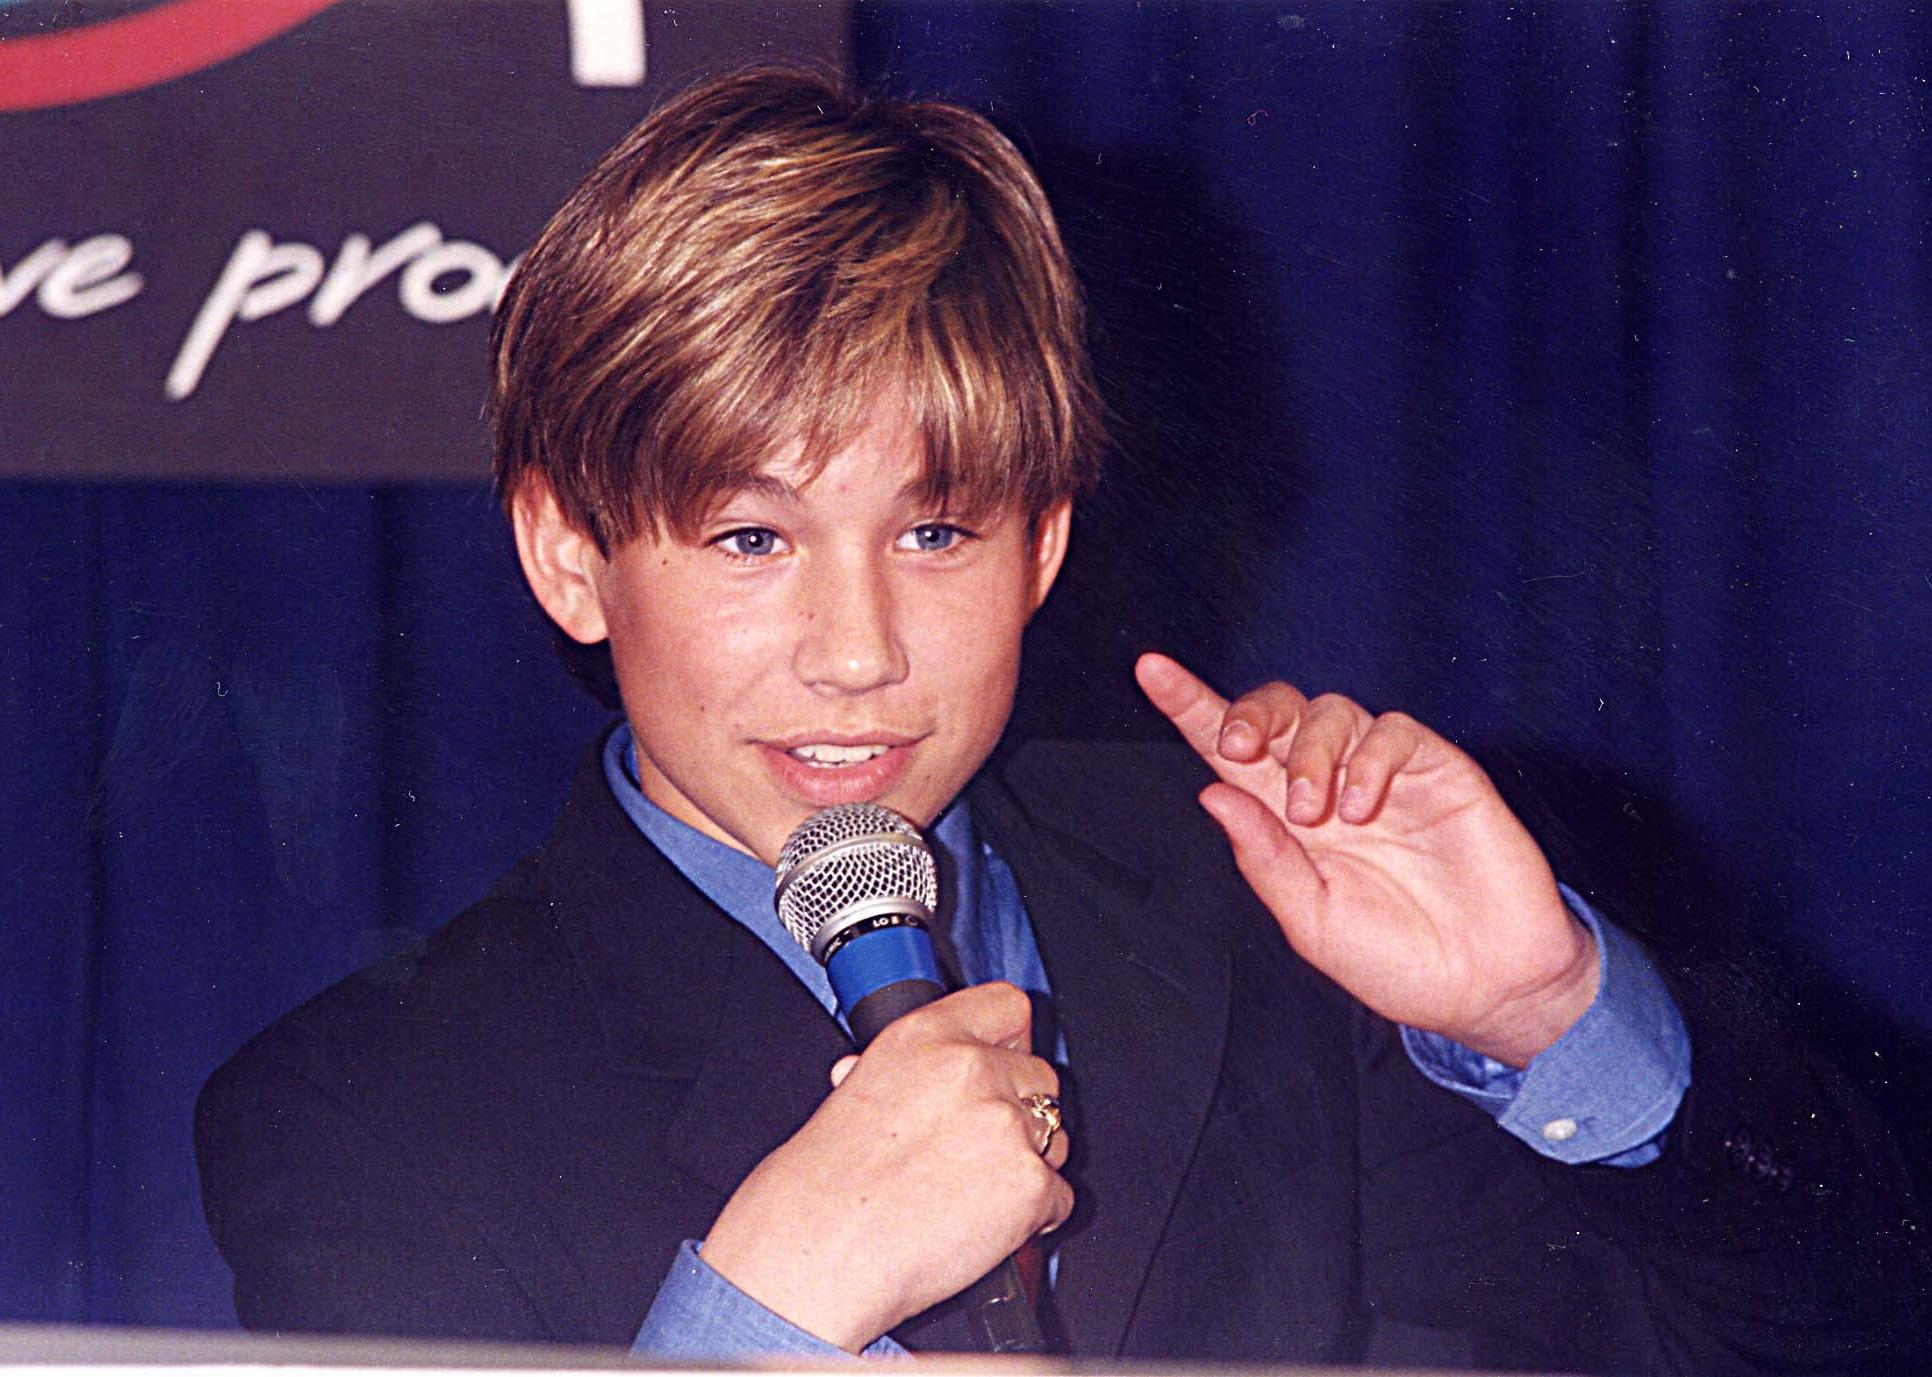 Jonathan Taylor Thomas during ShoWest '96 in Las Vegas, Nevada, United States